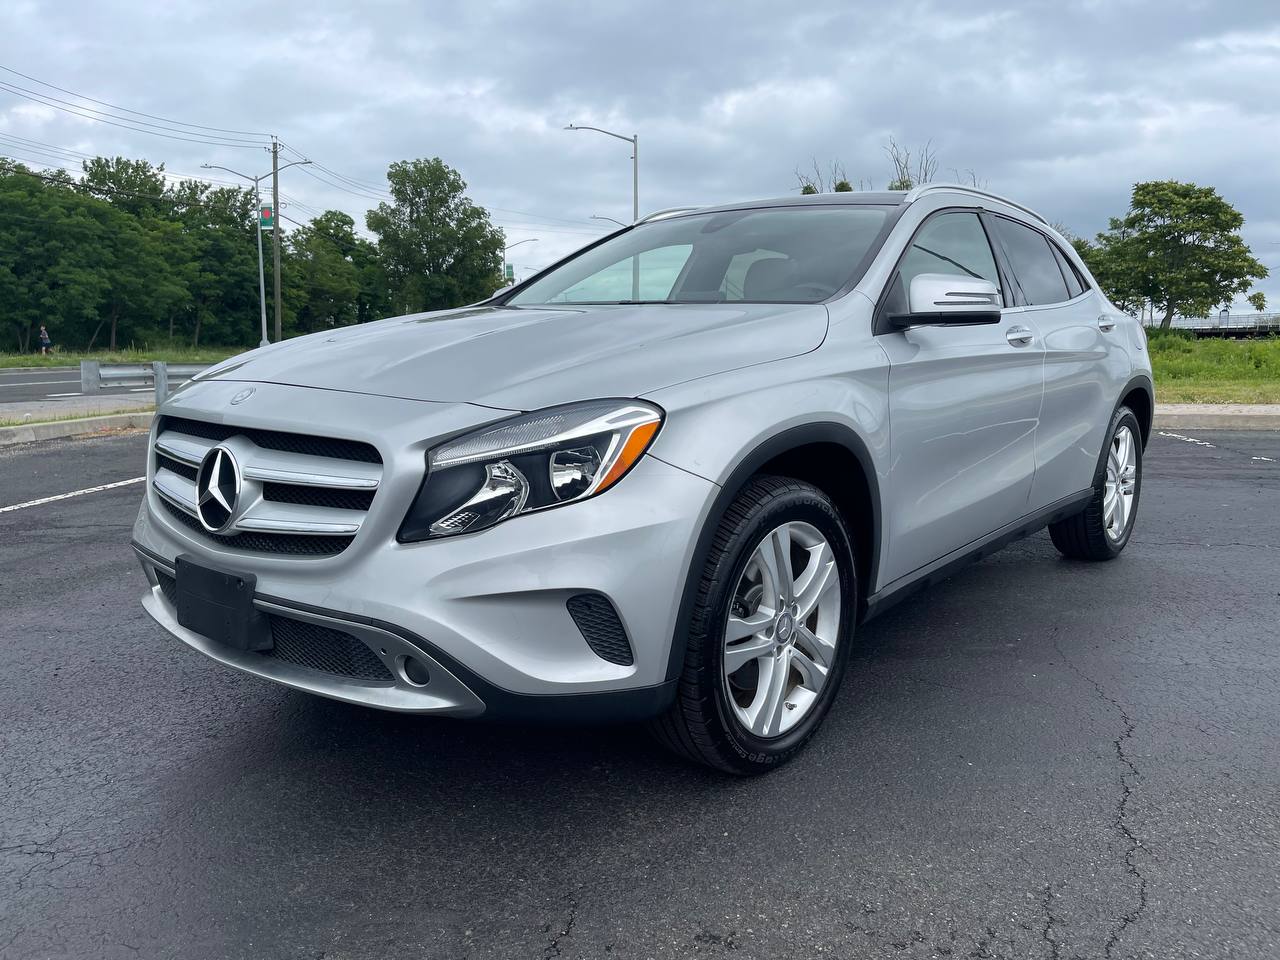 Used Car - 2016 Mercedes-Benz GLA 250 4MATIC AWD for Sale in Staten Island, NY